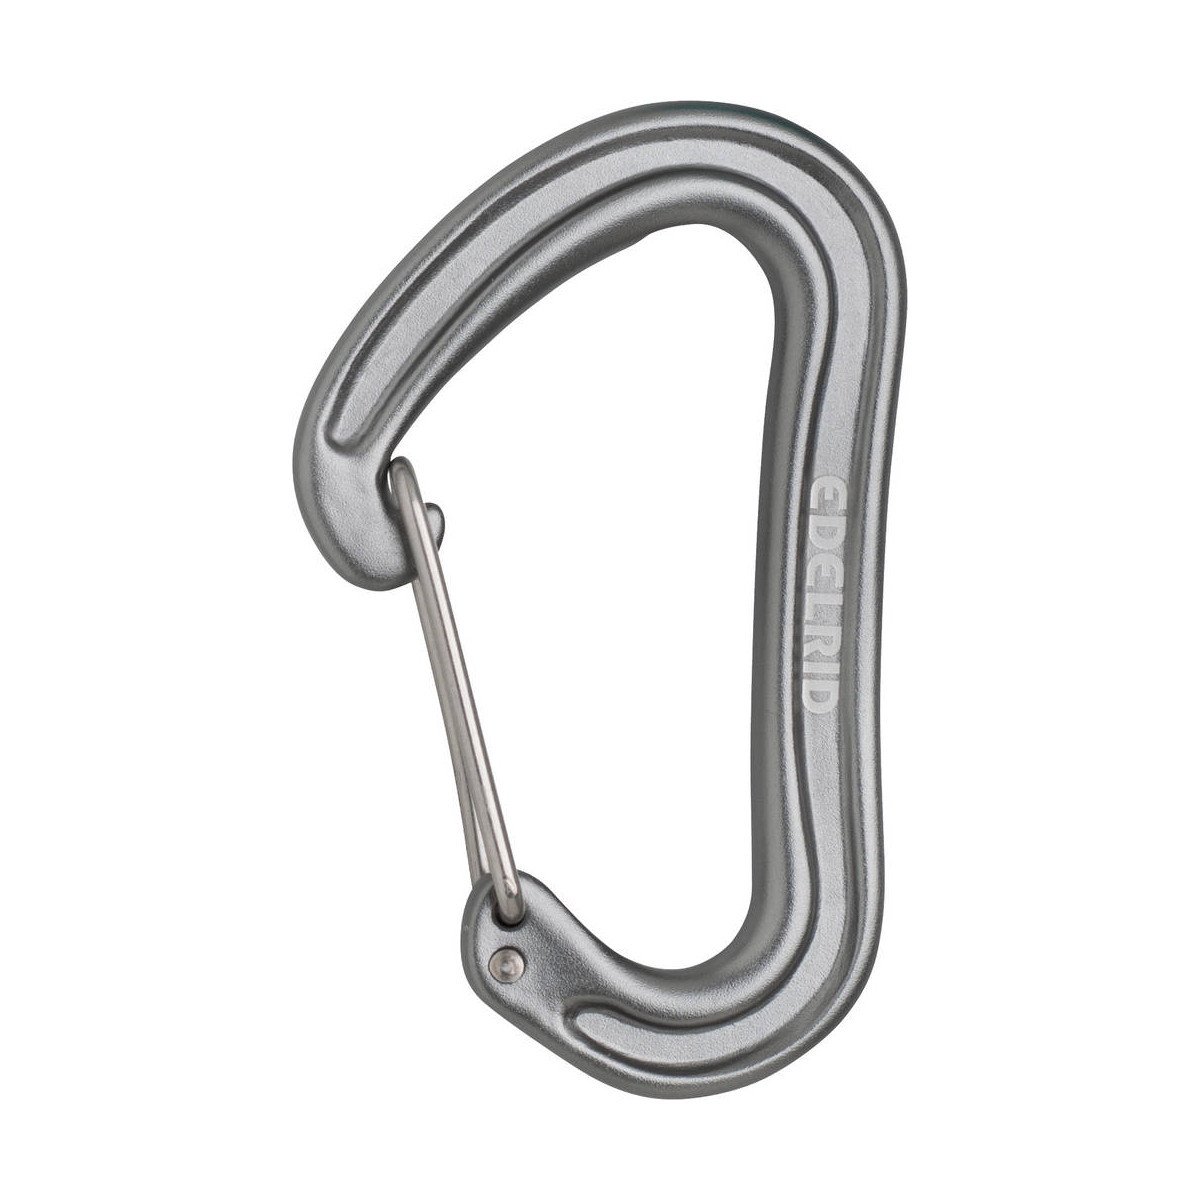 Edelrid Nineteen G wire gate carabiner in silver colour